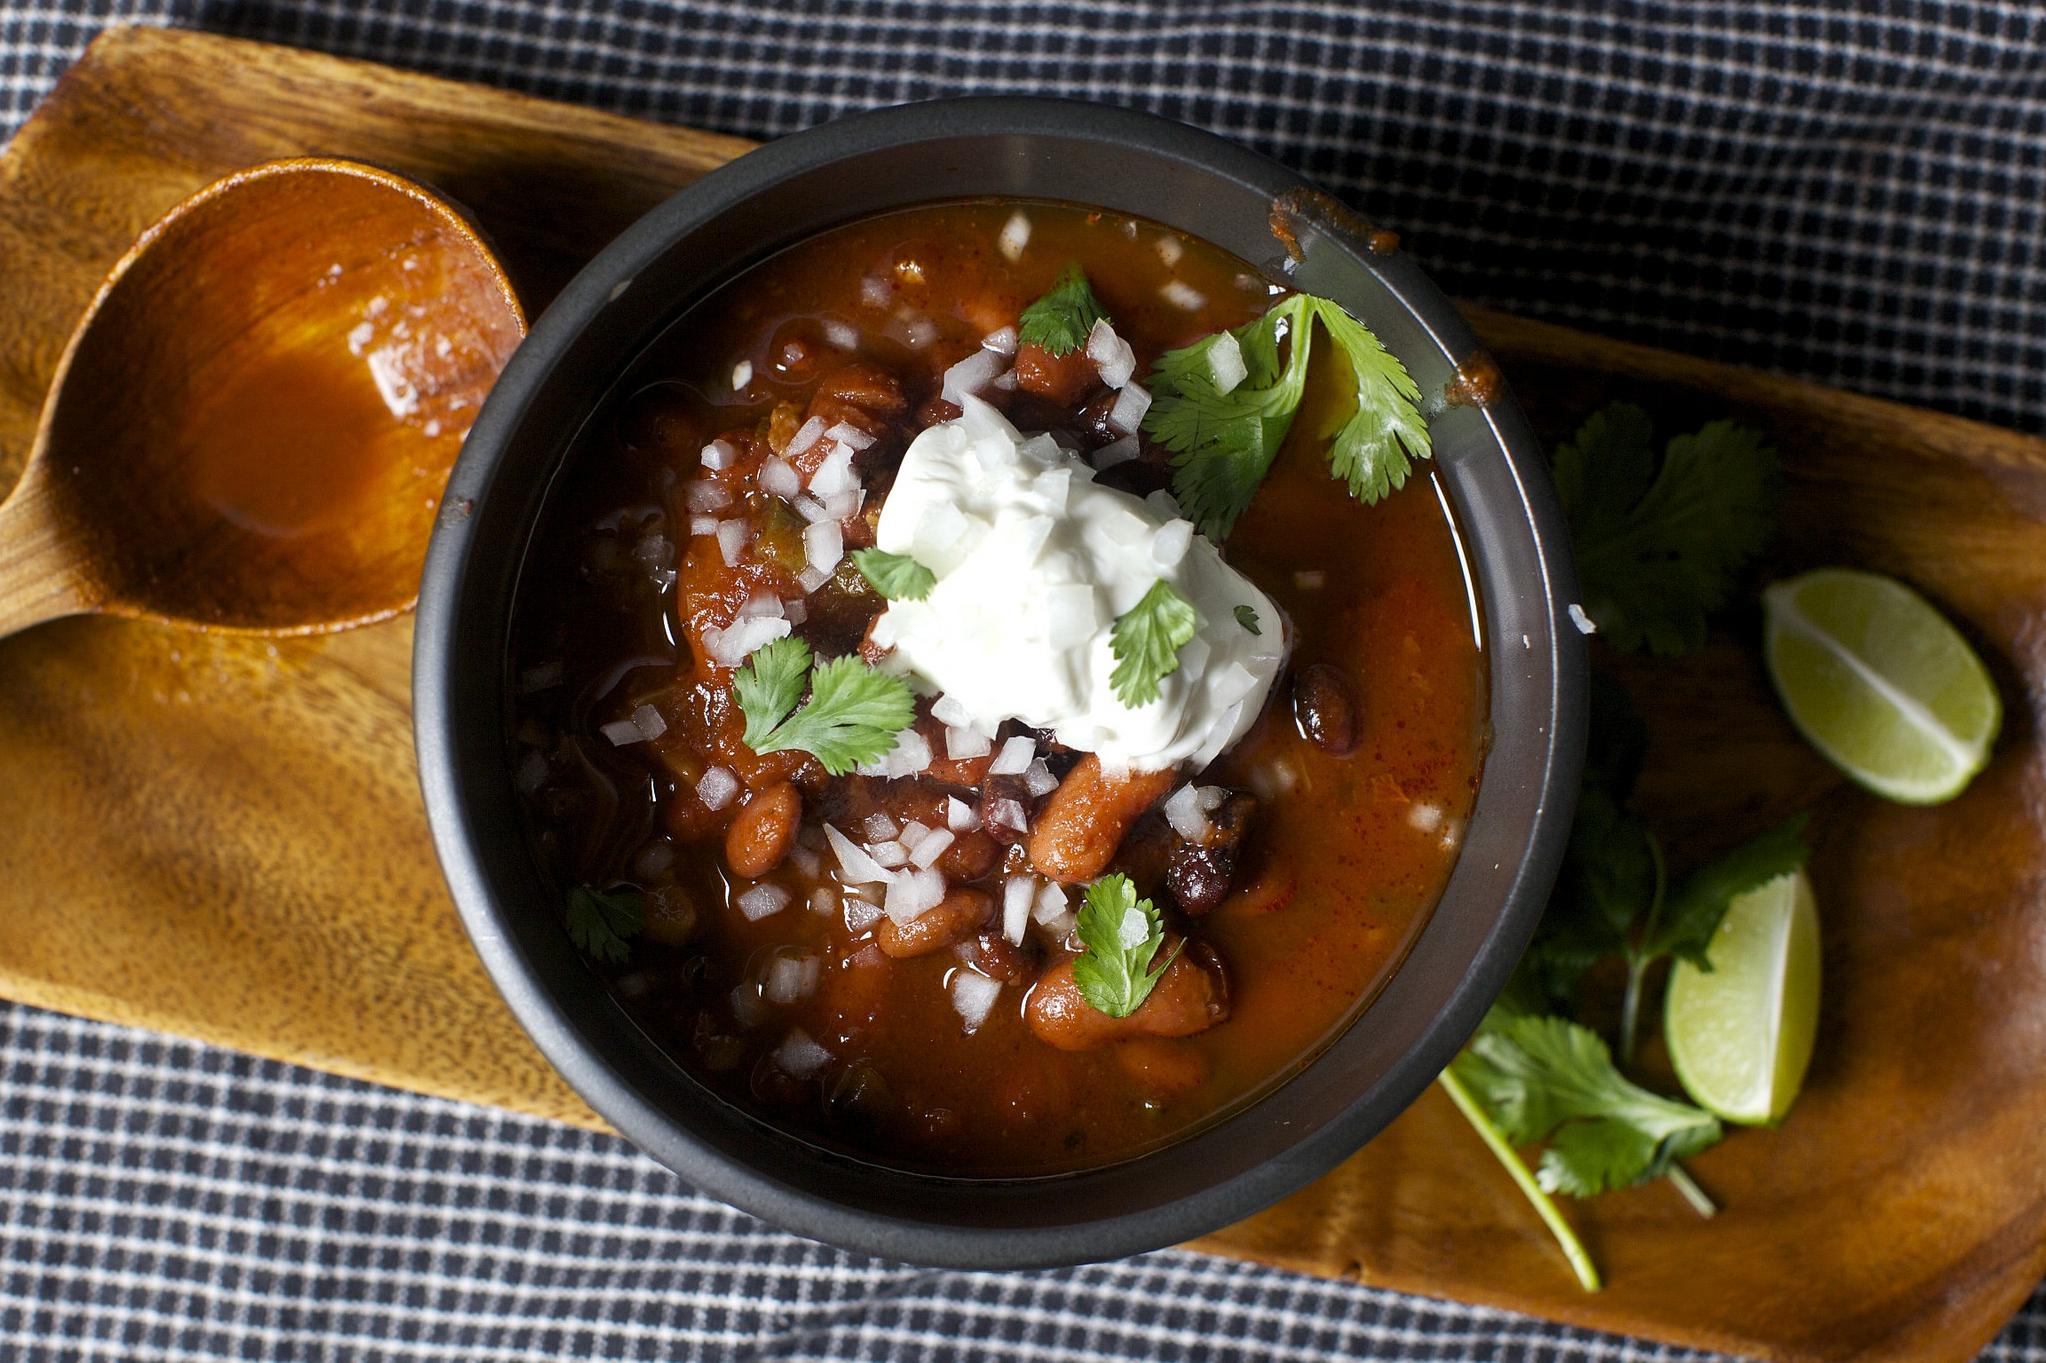  Warm up with a bowl of this three-bean and coffee chili on a chilly night!